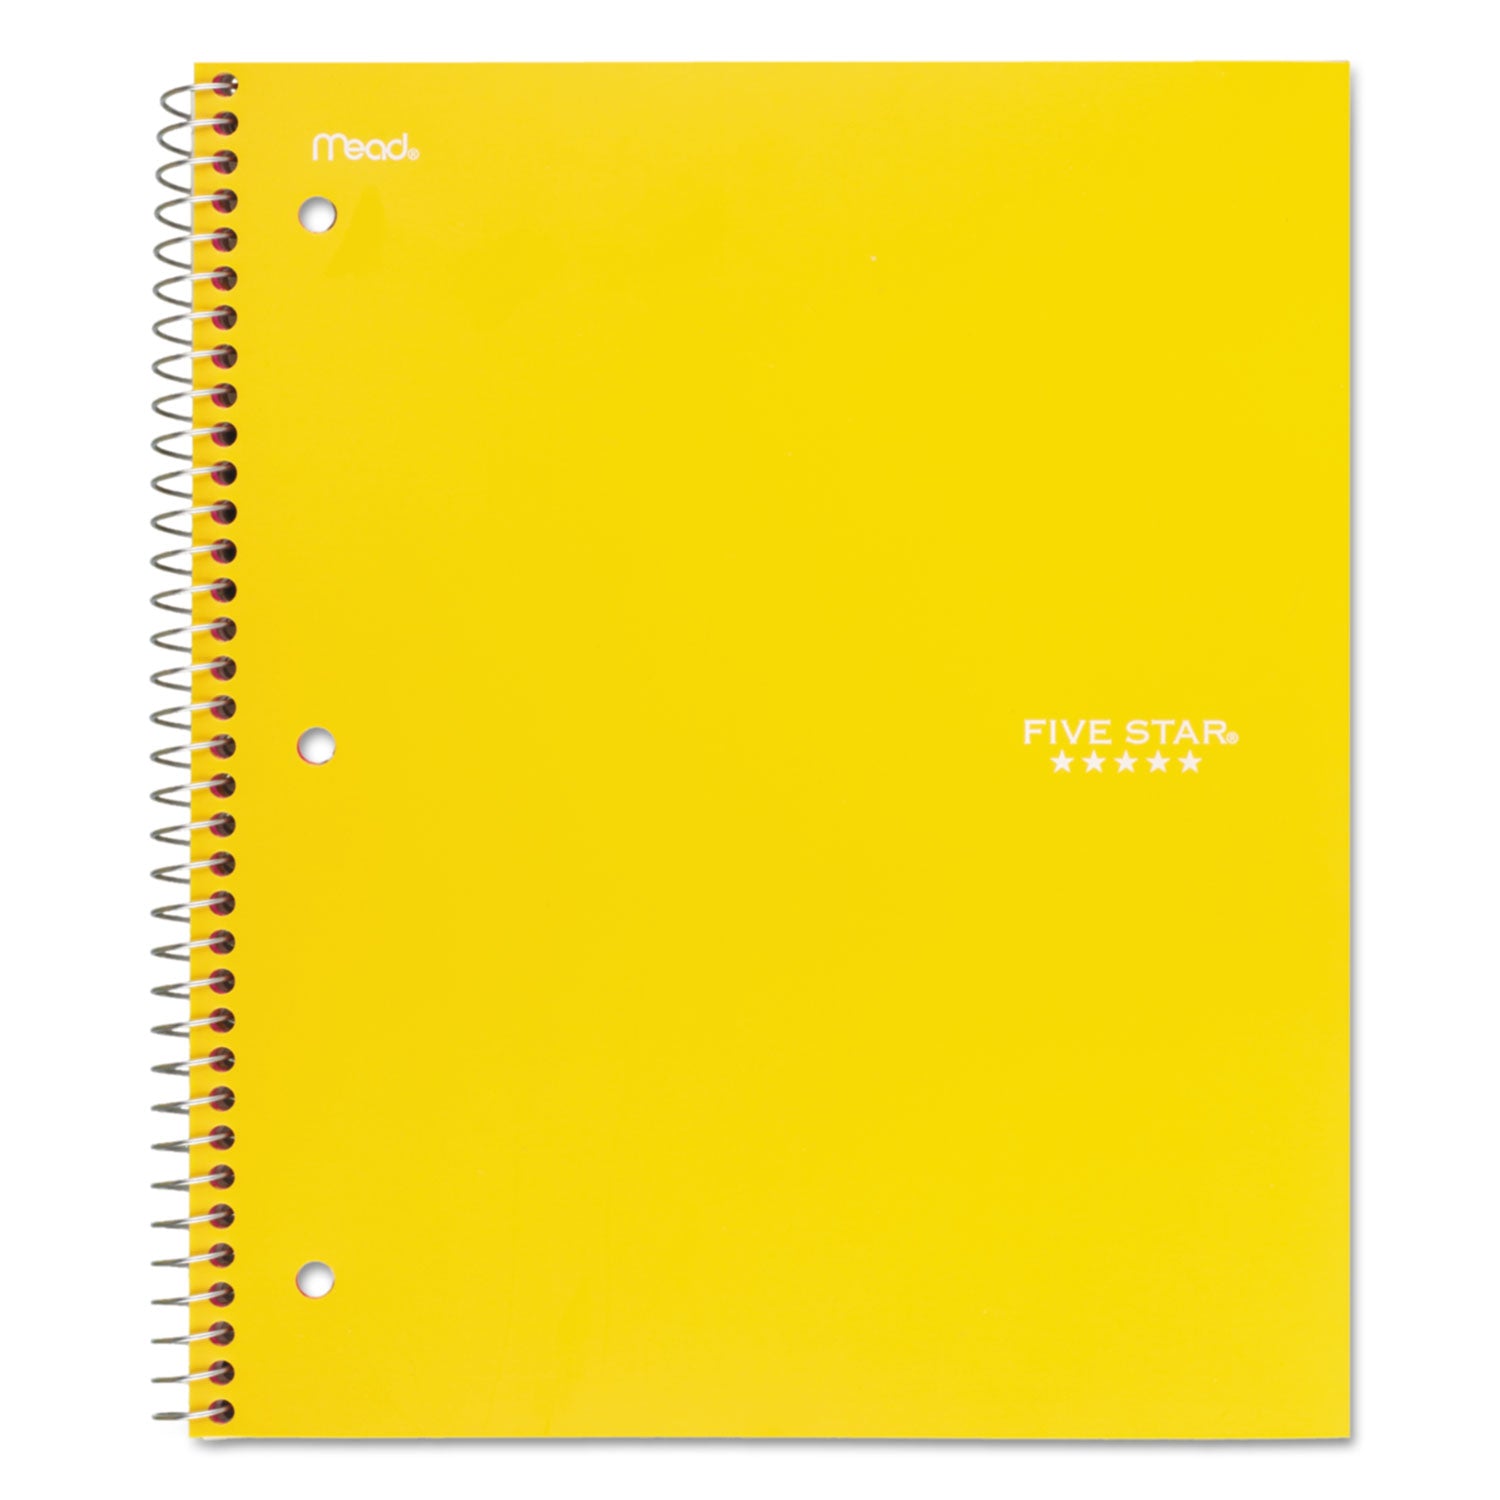 Trend Wirebound Notebook, Two Pockets, 3-Subject, Medium/College Rule, Randomly Assorted Cover Color, (150) 11 x 8.5 Sheets - 